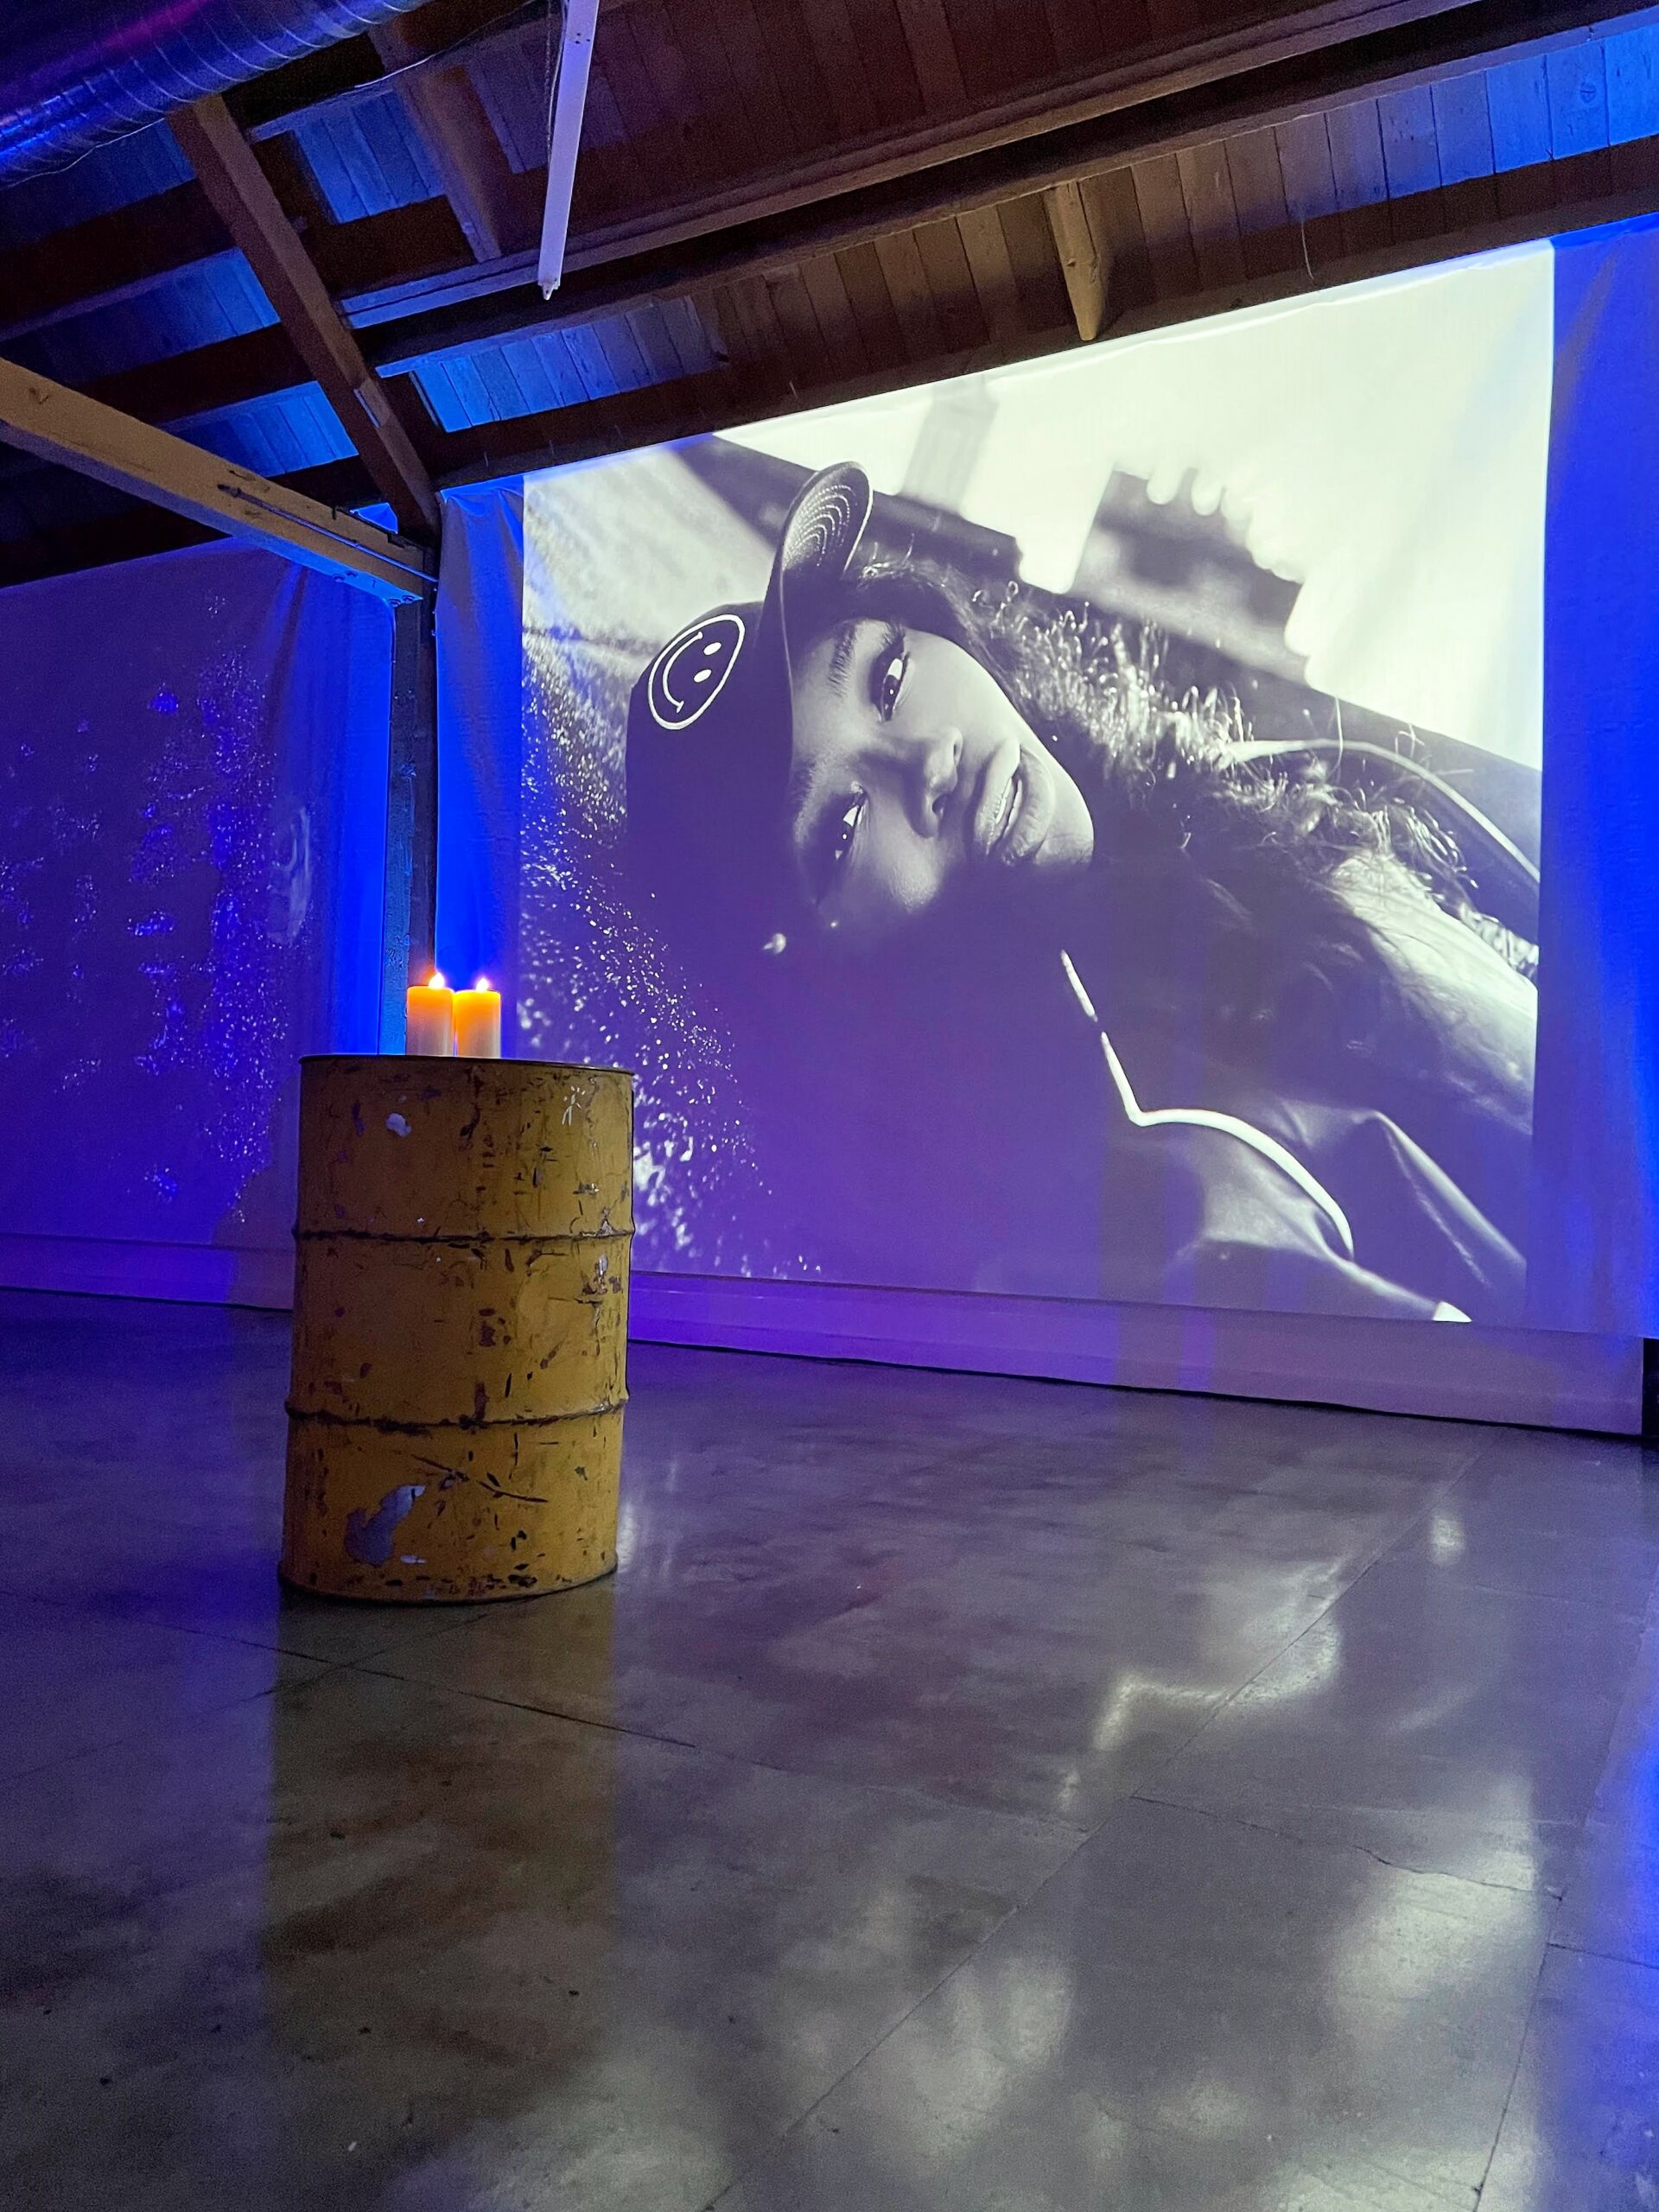 MG Studio SZA Album Release Party Projection Up Close